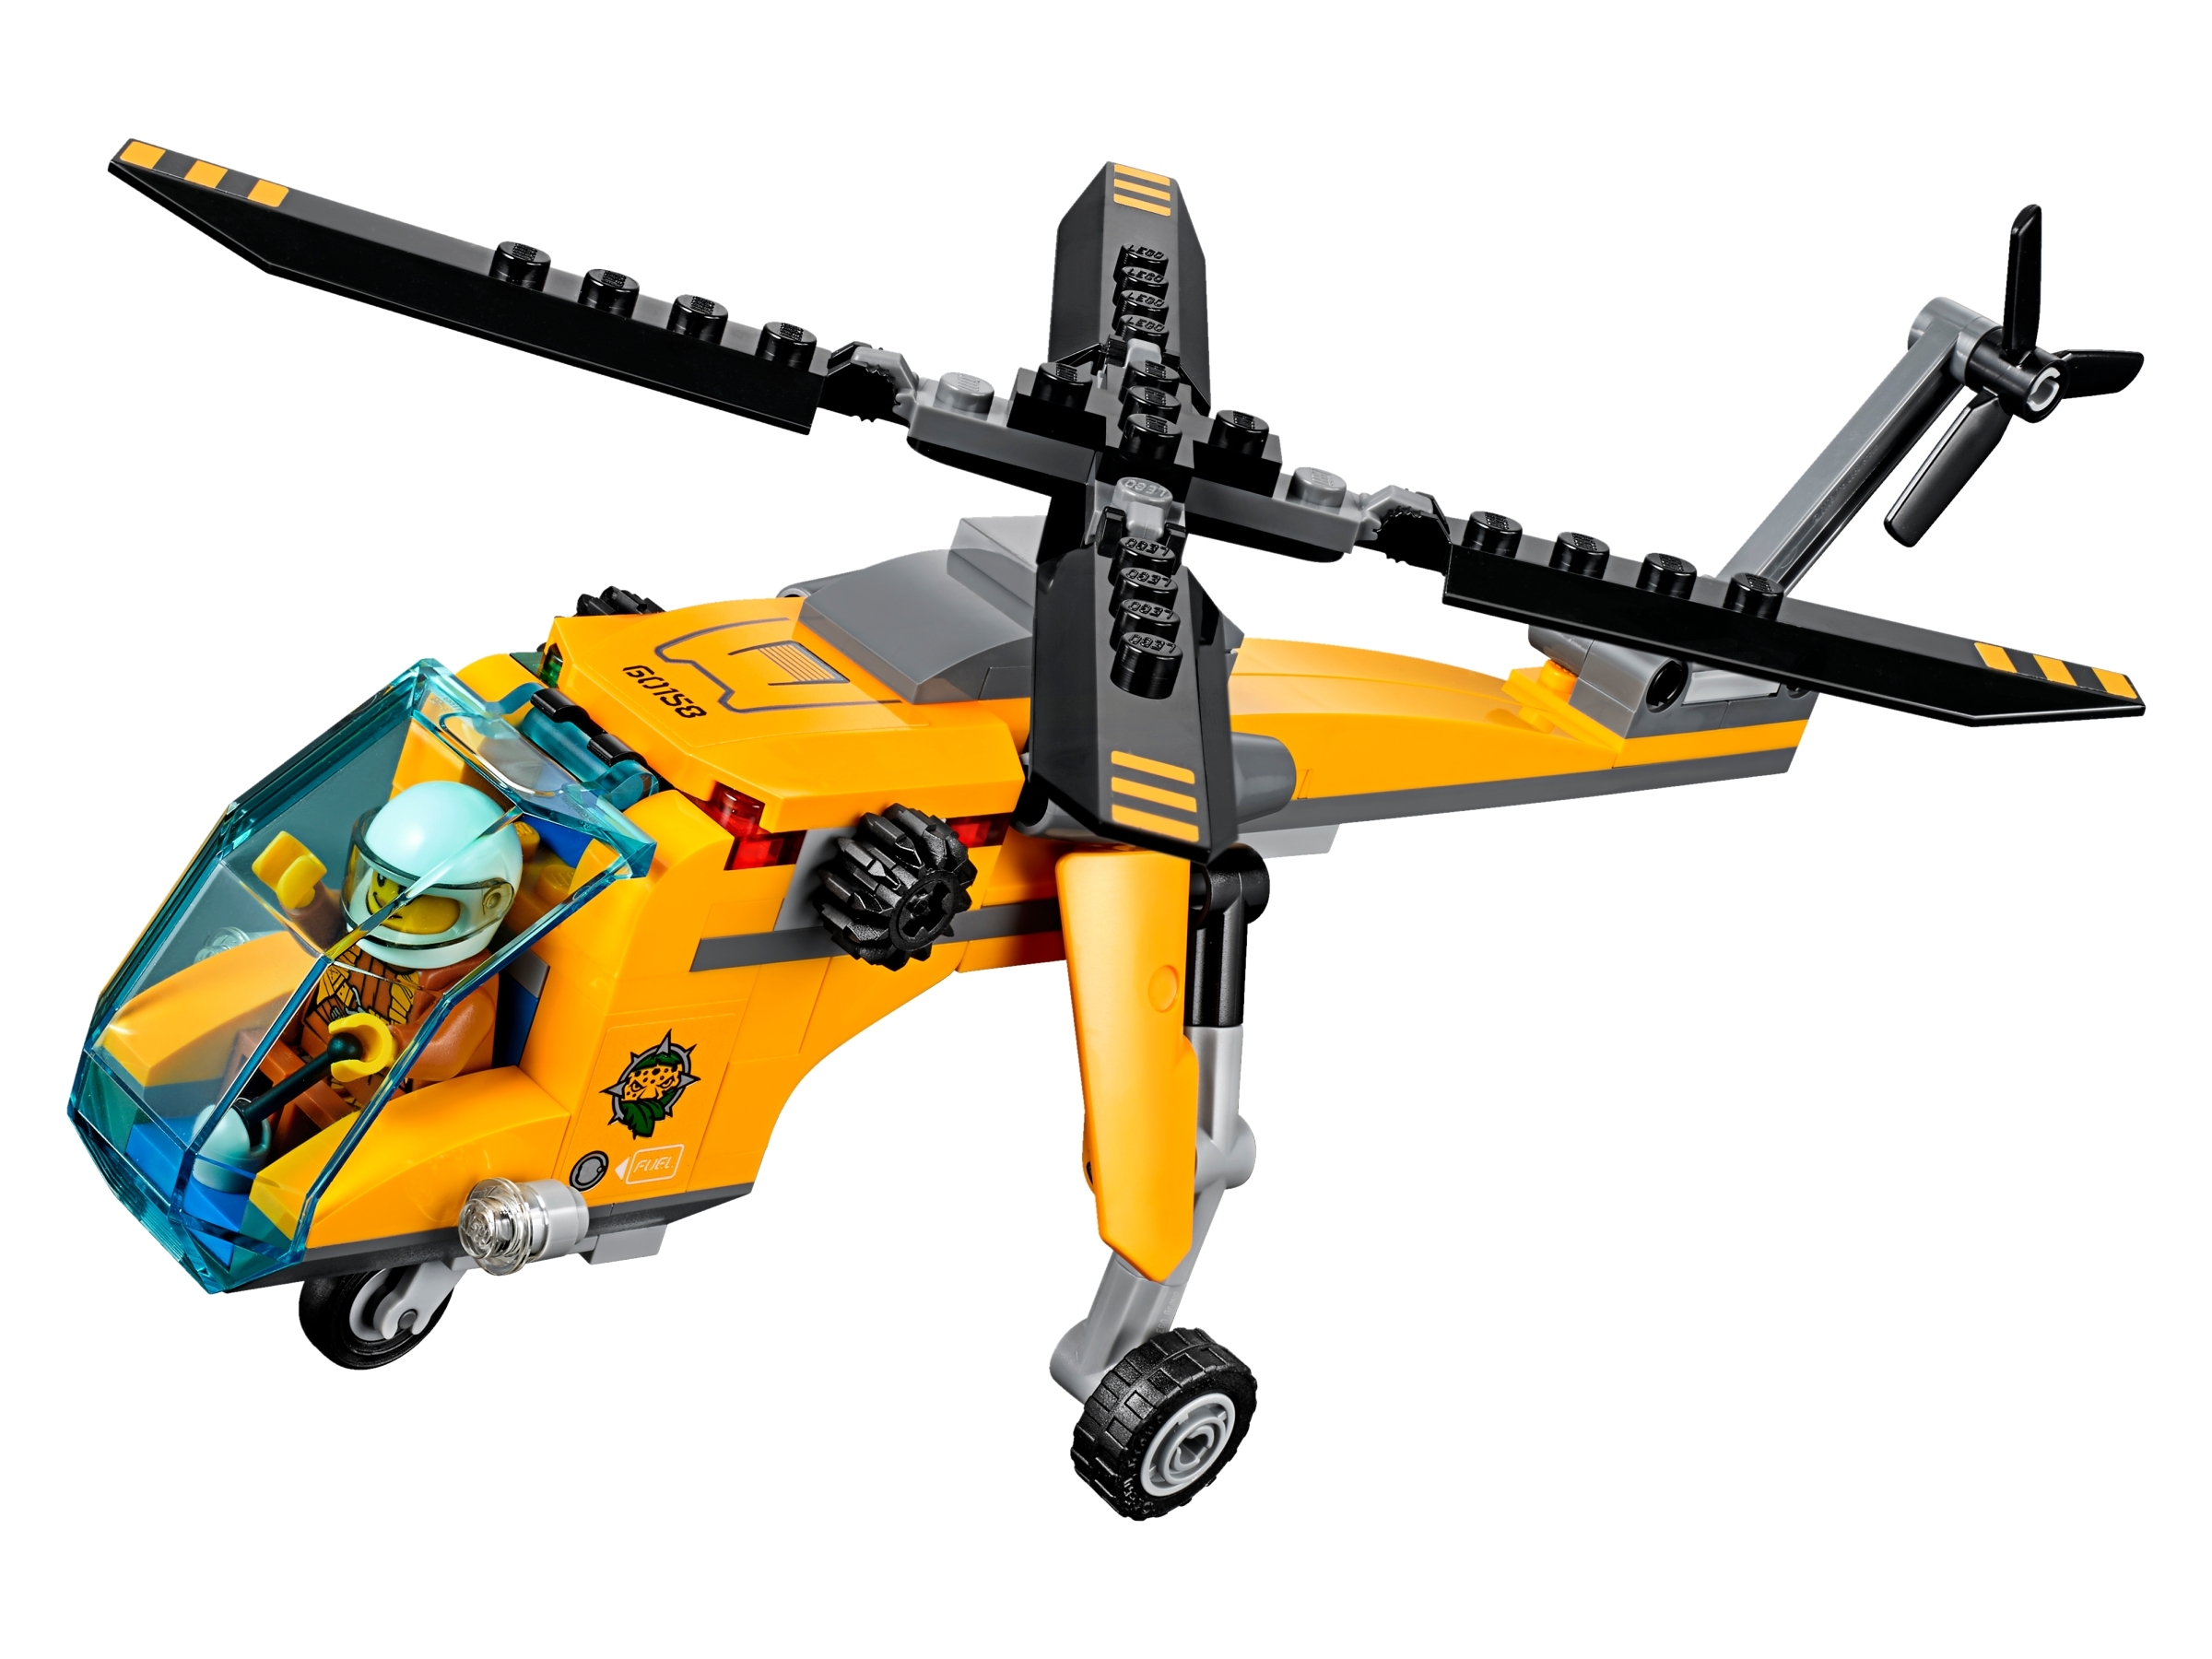 LEGO City 60158 Jungle Cargo Helicopter 201pcs 2017 for sale online